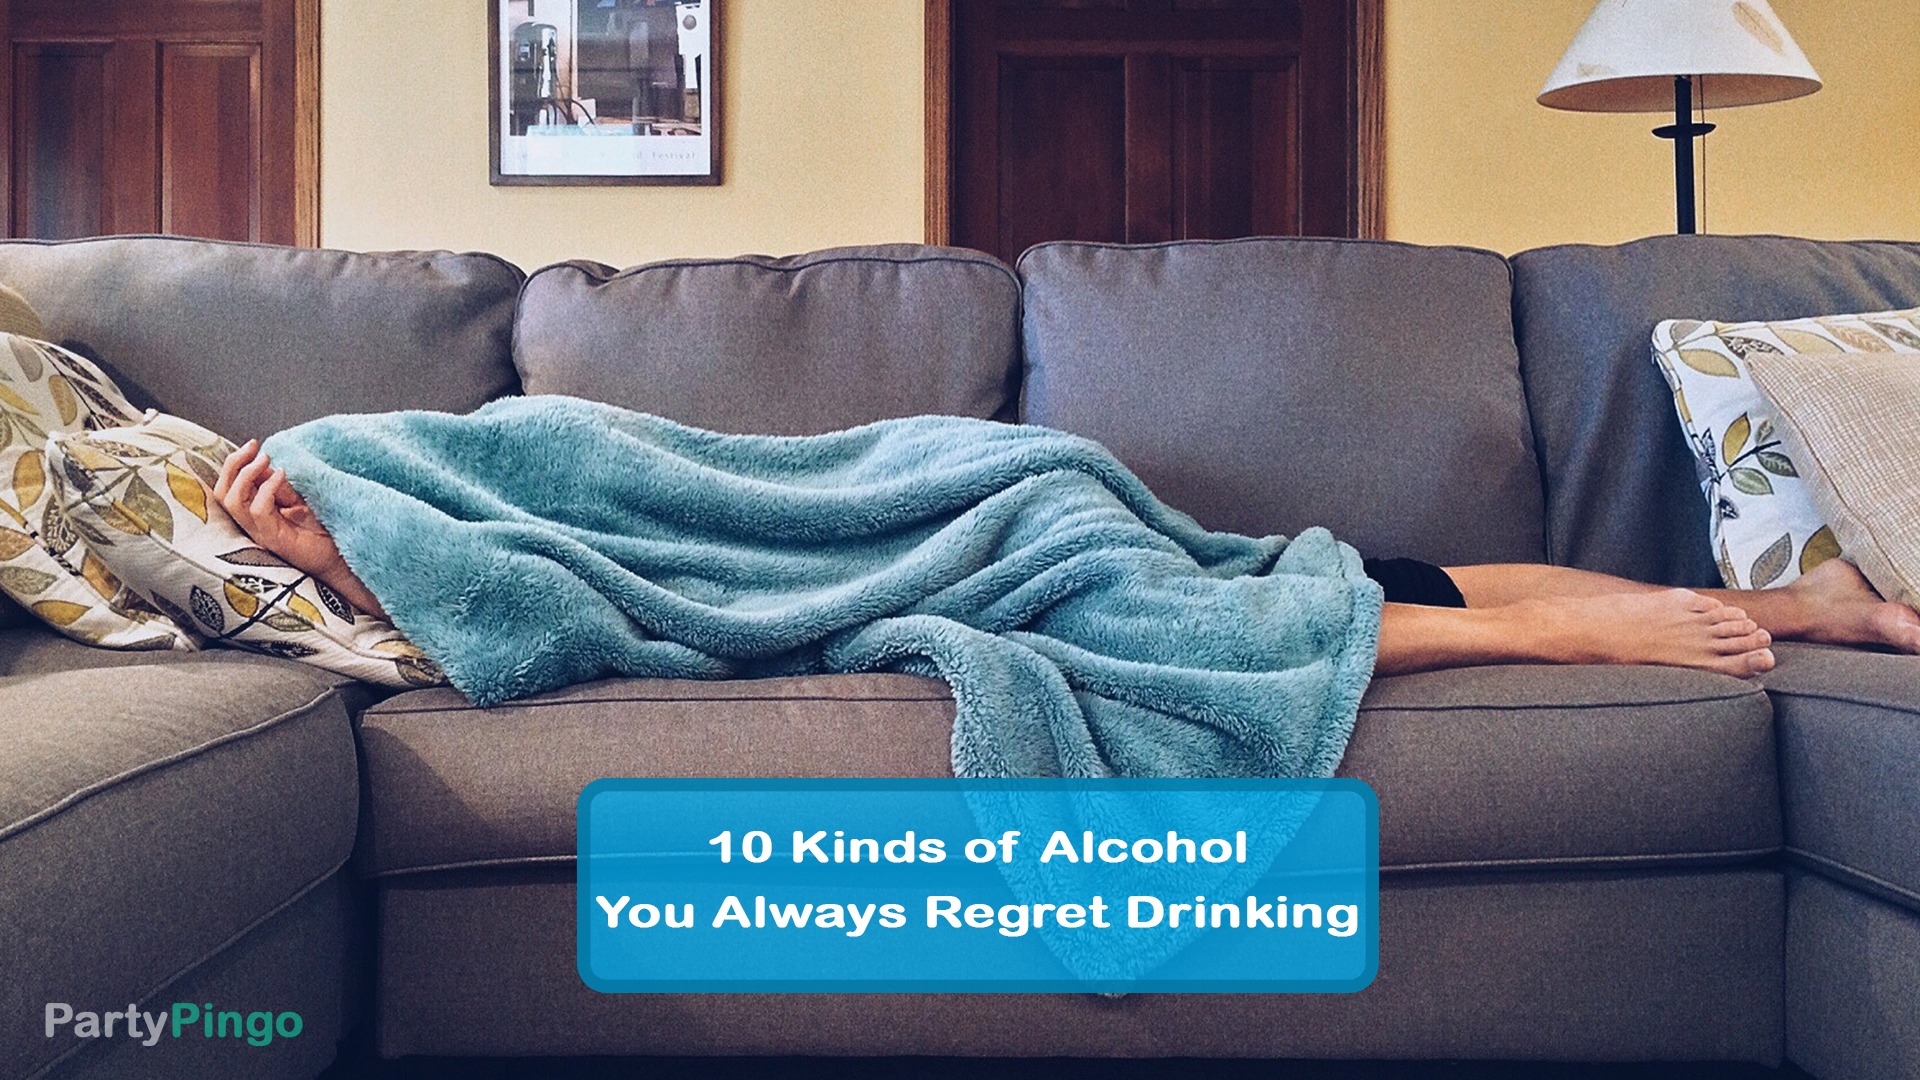 10 Kinds of Alcohol You Always Regret Drinking